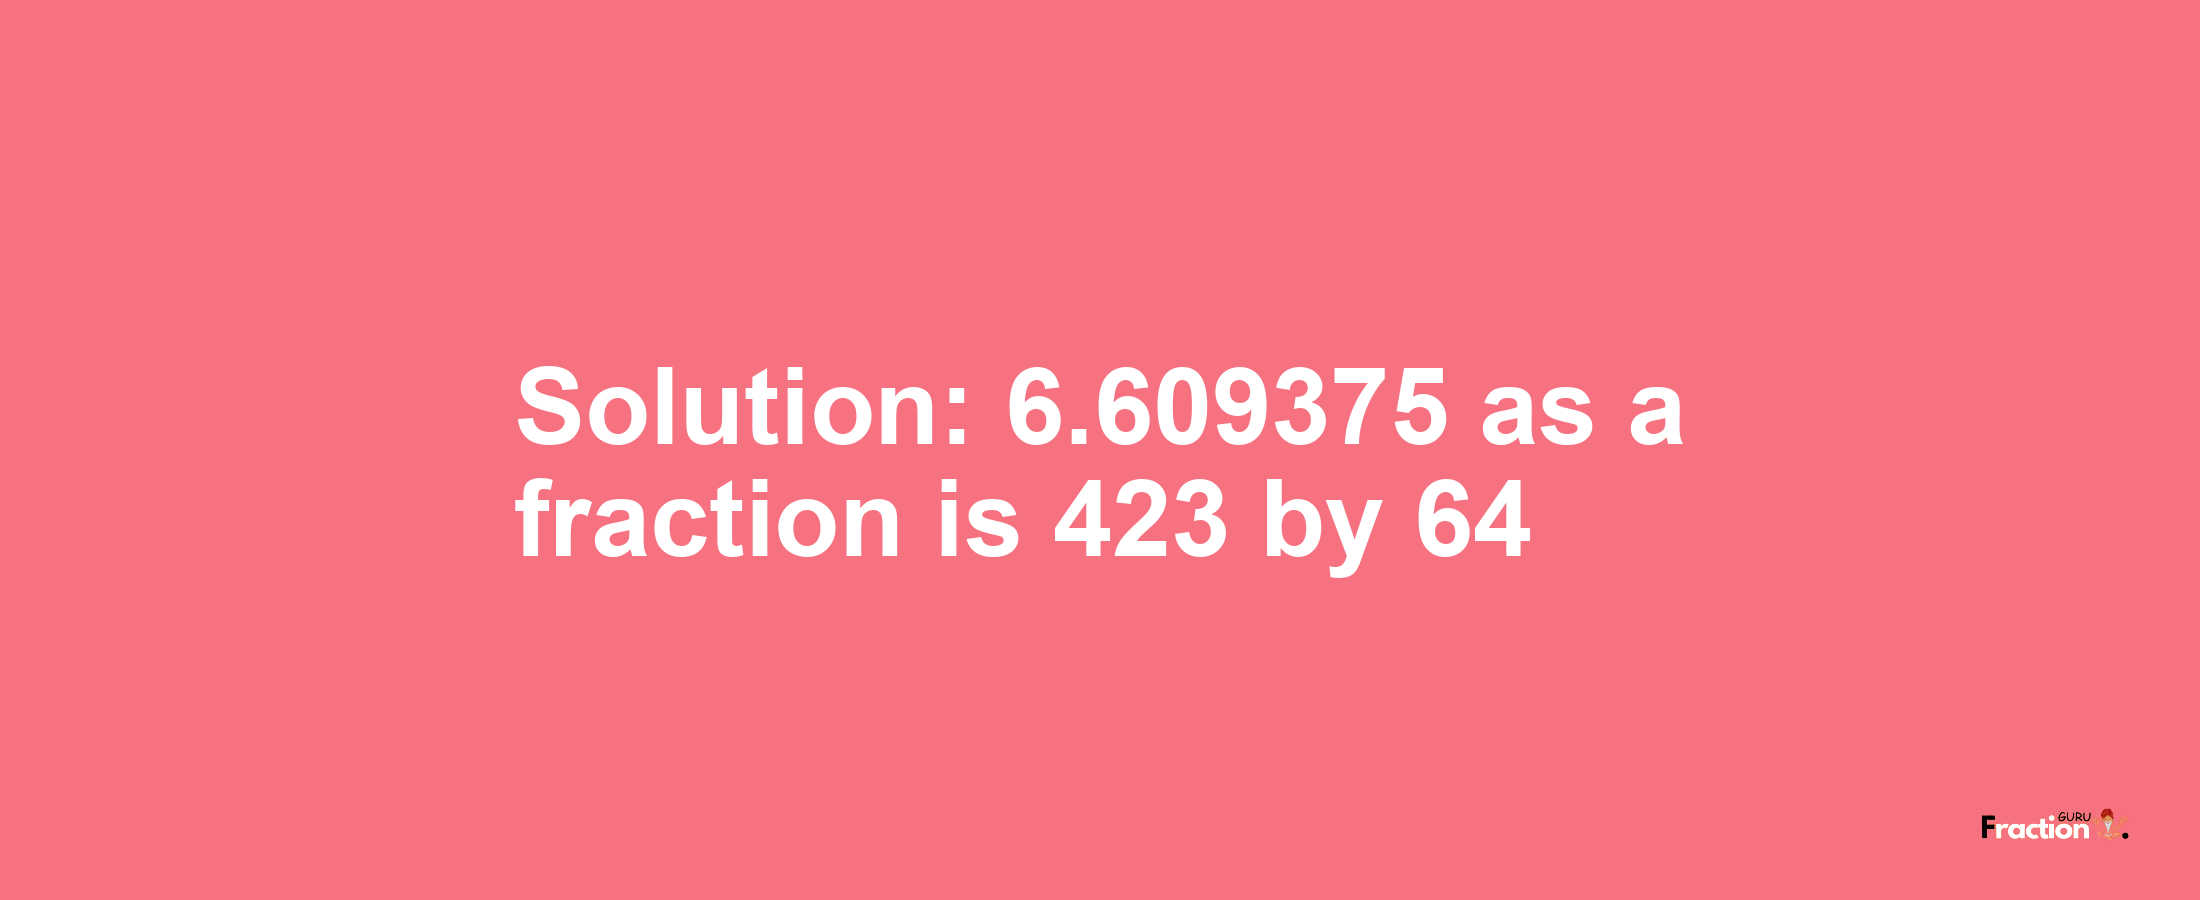 Solution:6.609375 as a fraction is 423/64